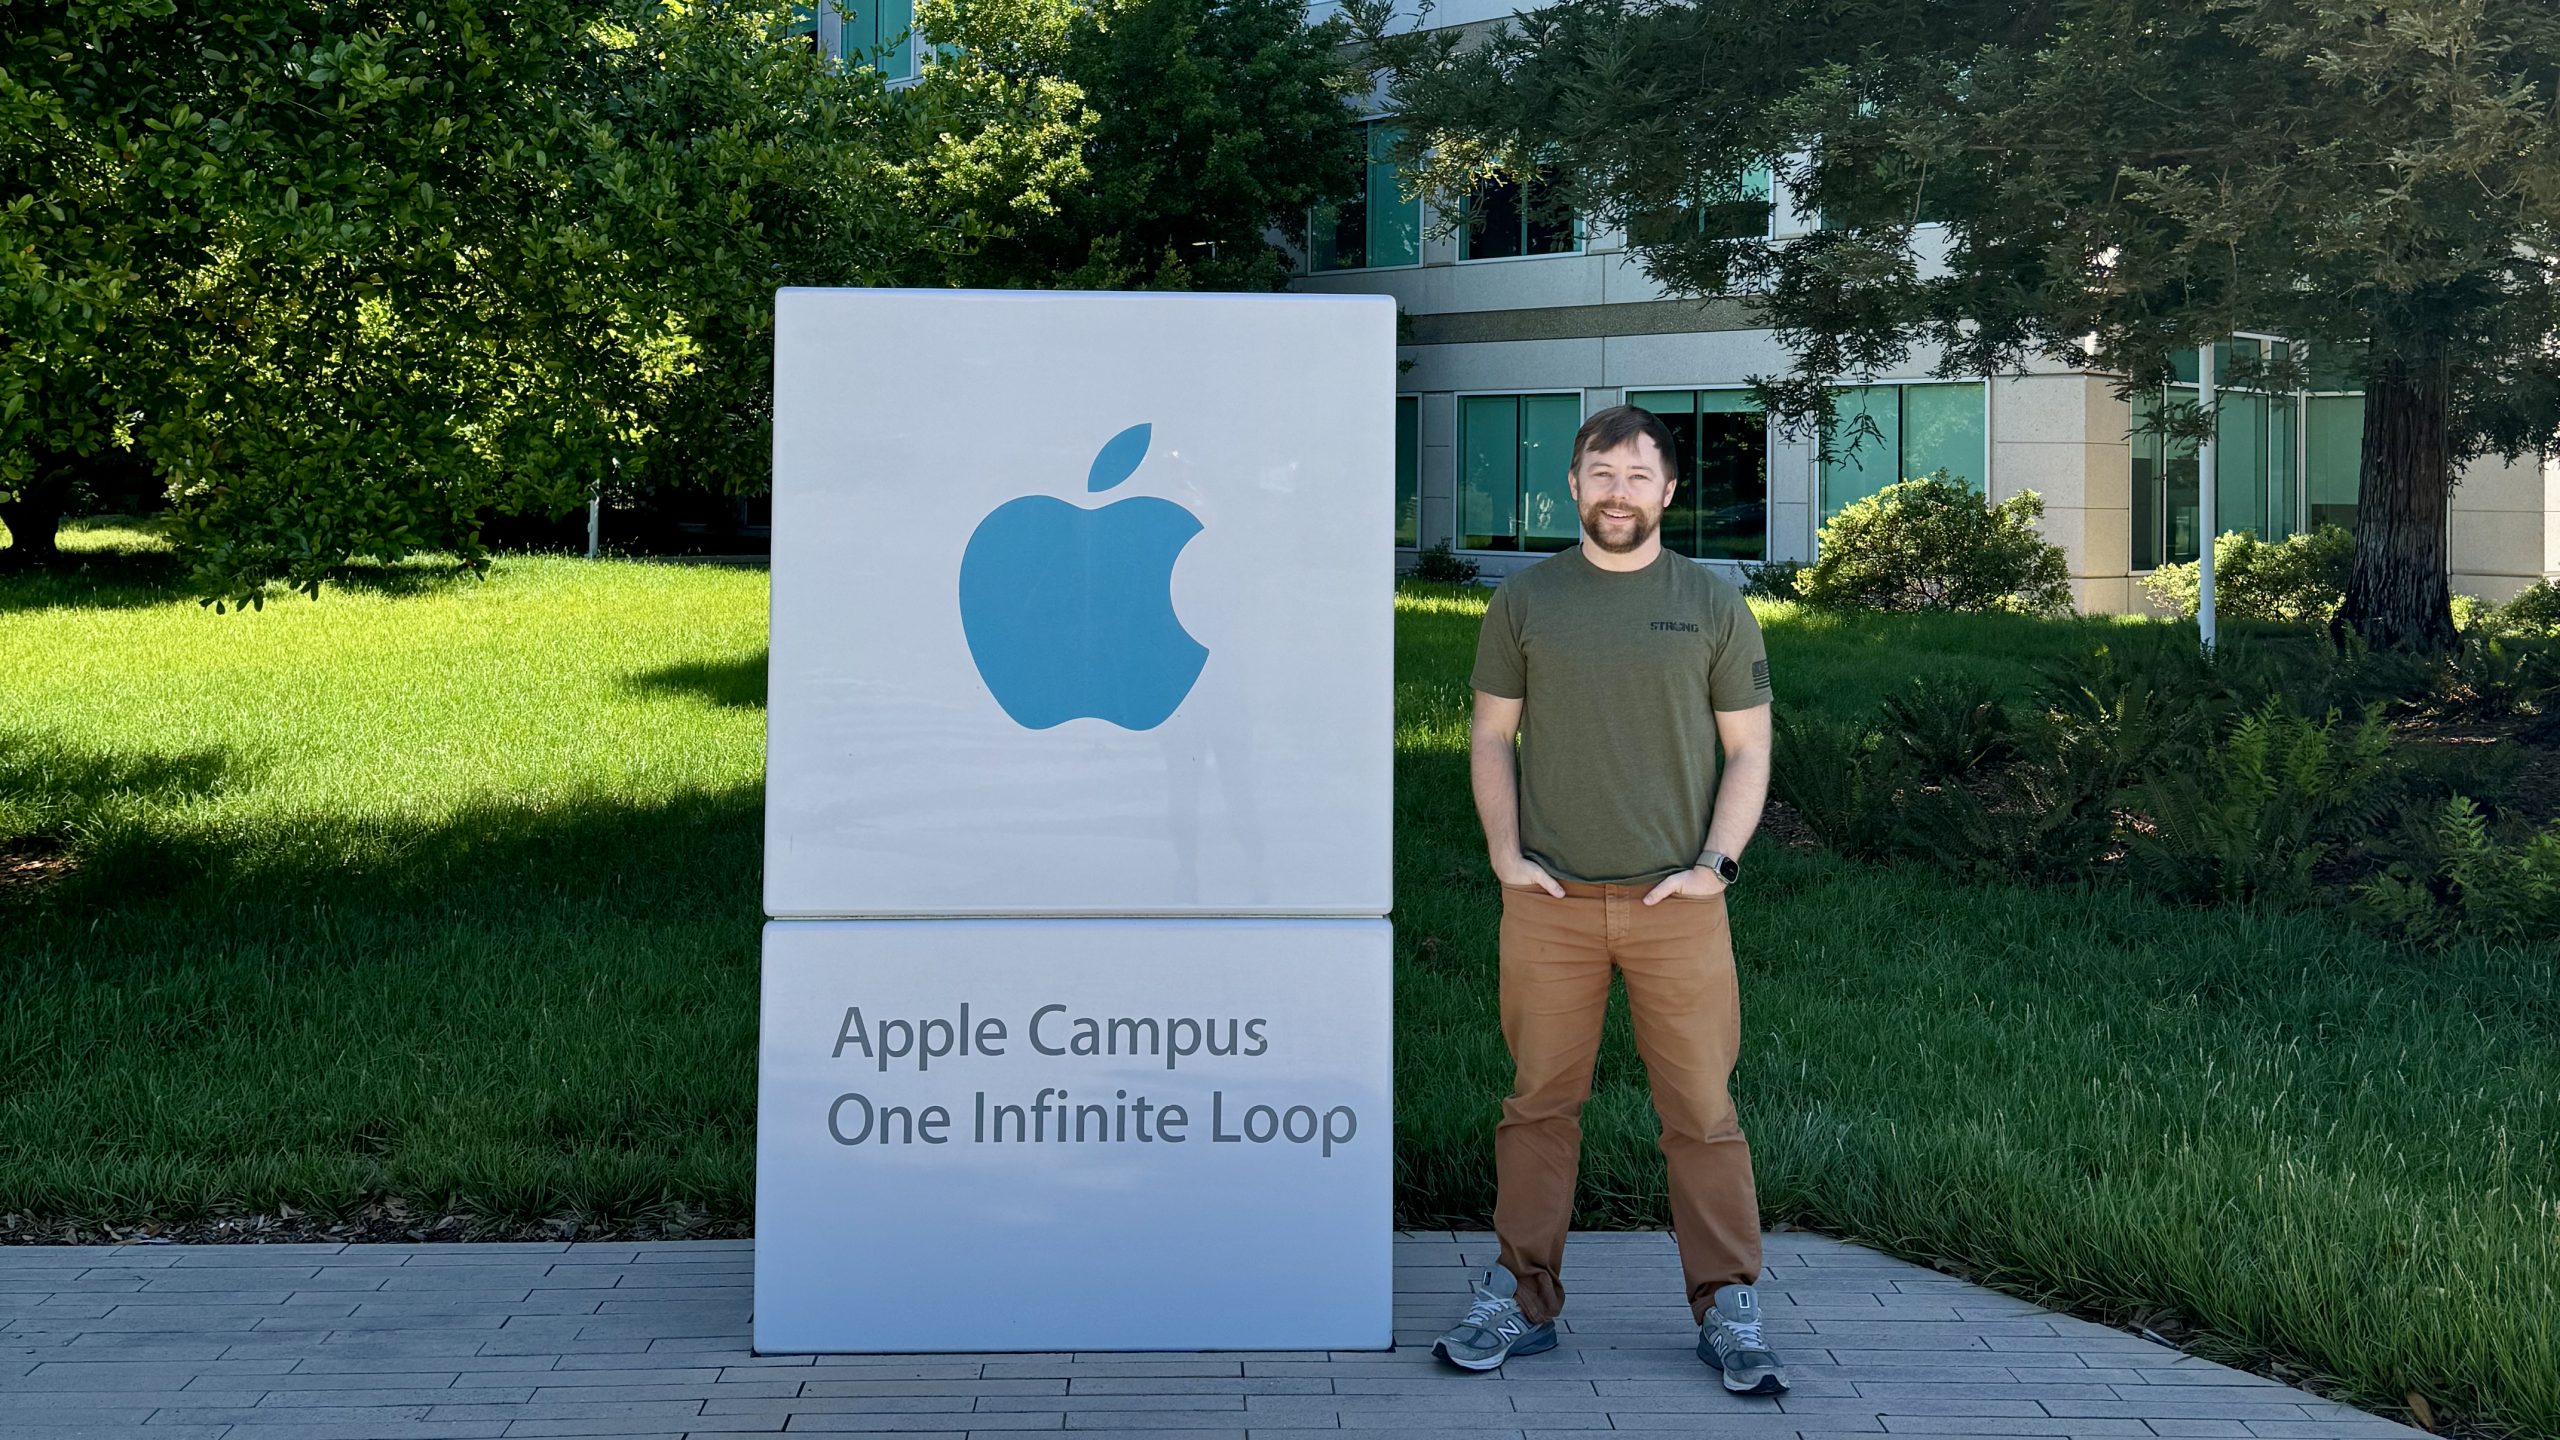 Reid standing in front of the Apple Campus sign at One Infinite Loop